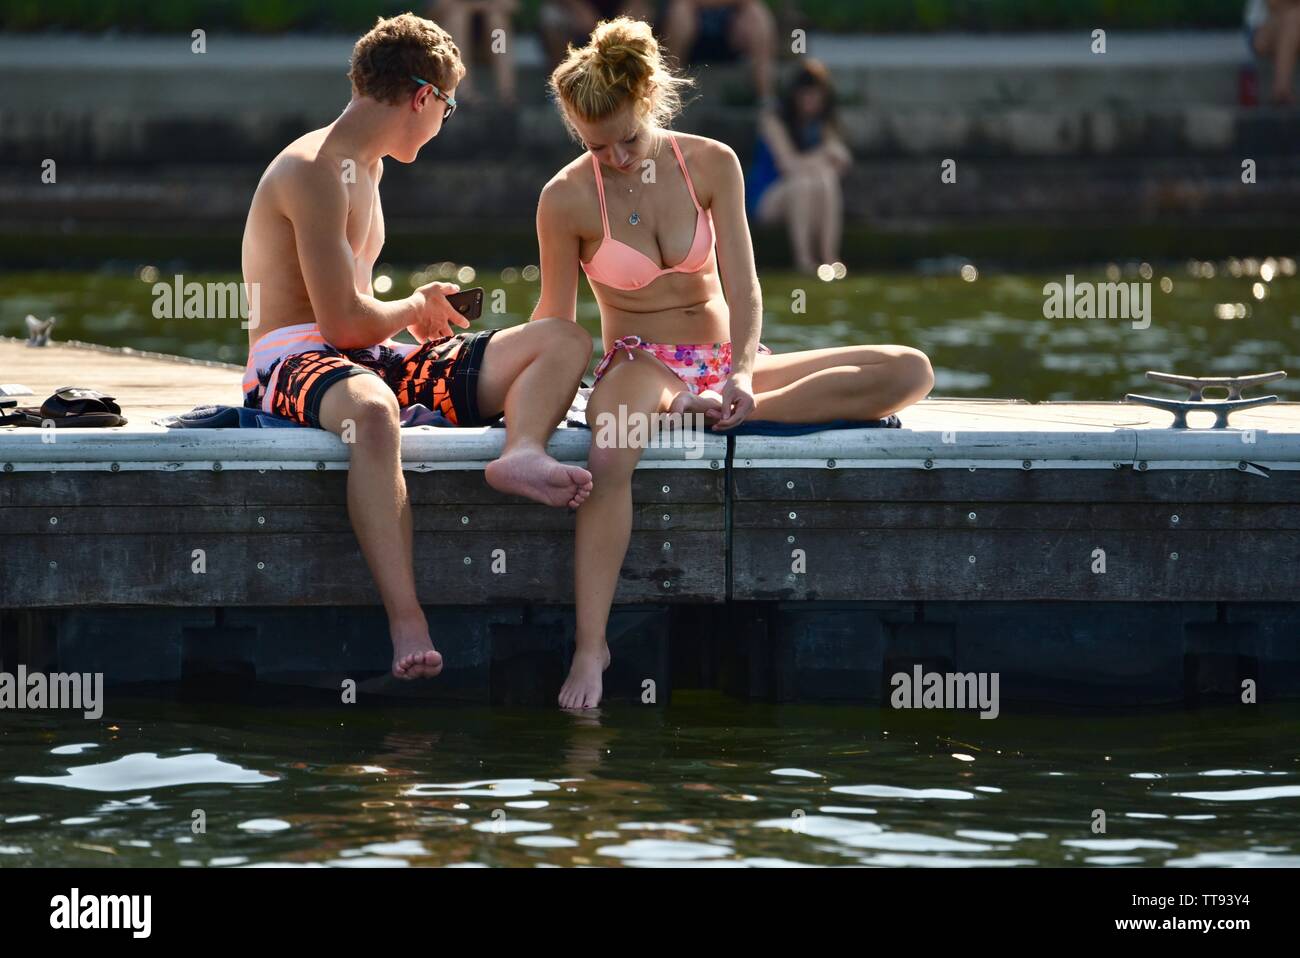 Young college students, male and female, in swimsuits, on dock, Lake Mendota, near University of Wisconsin Memorial Union, Madison, Wisconsin, USA Stock Photo